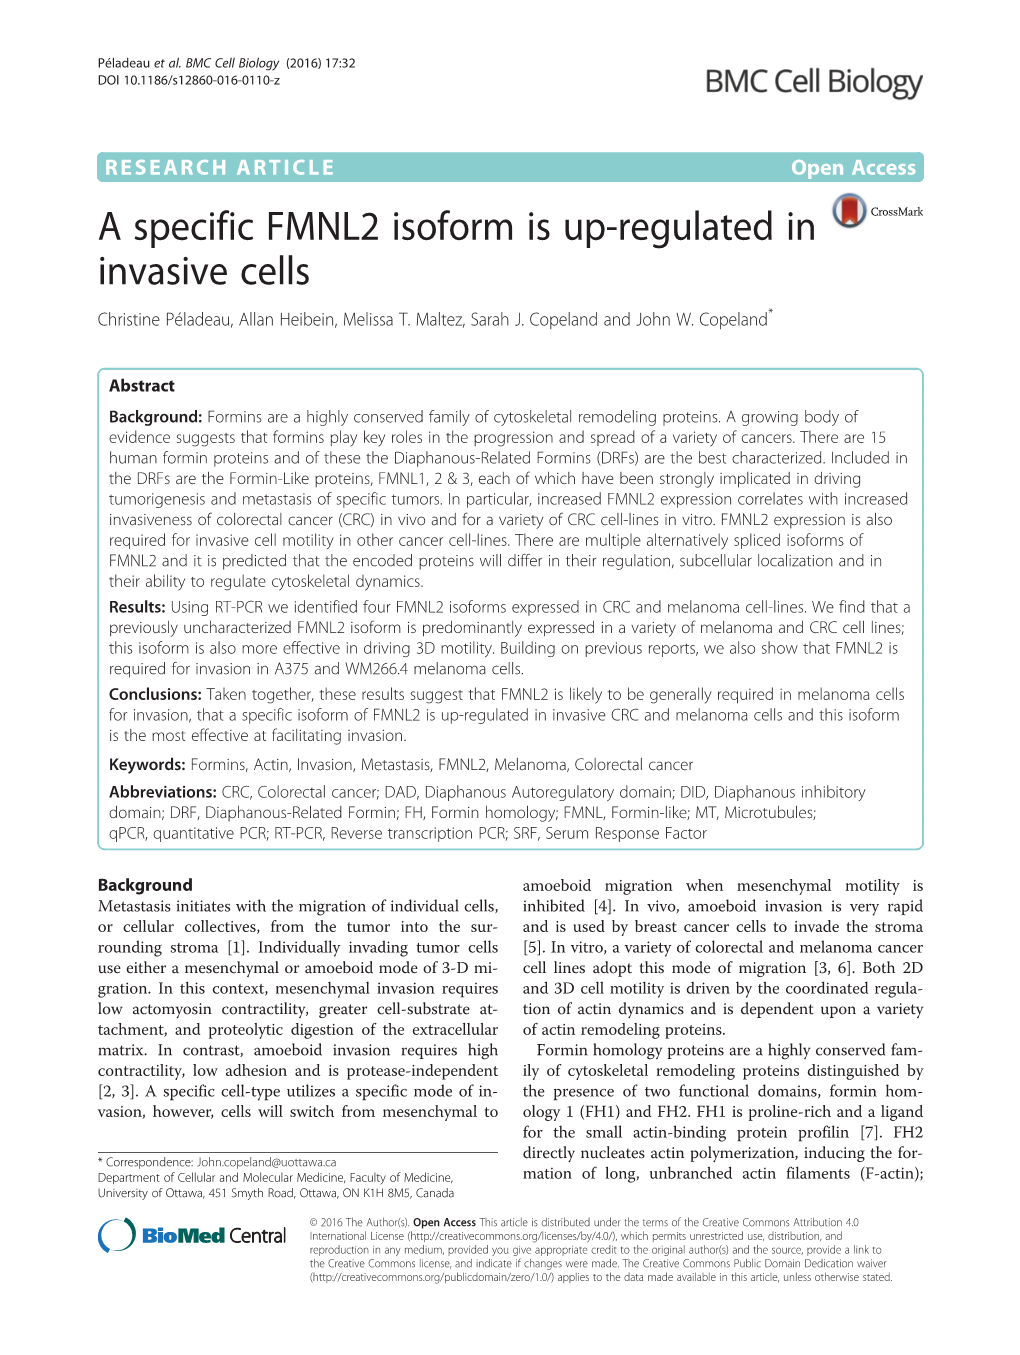 A Specific FMNL2 Isoform Is Up-Regulated in Invasive Cells Christine Péladeau, Allan Heibein, Melissa T